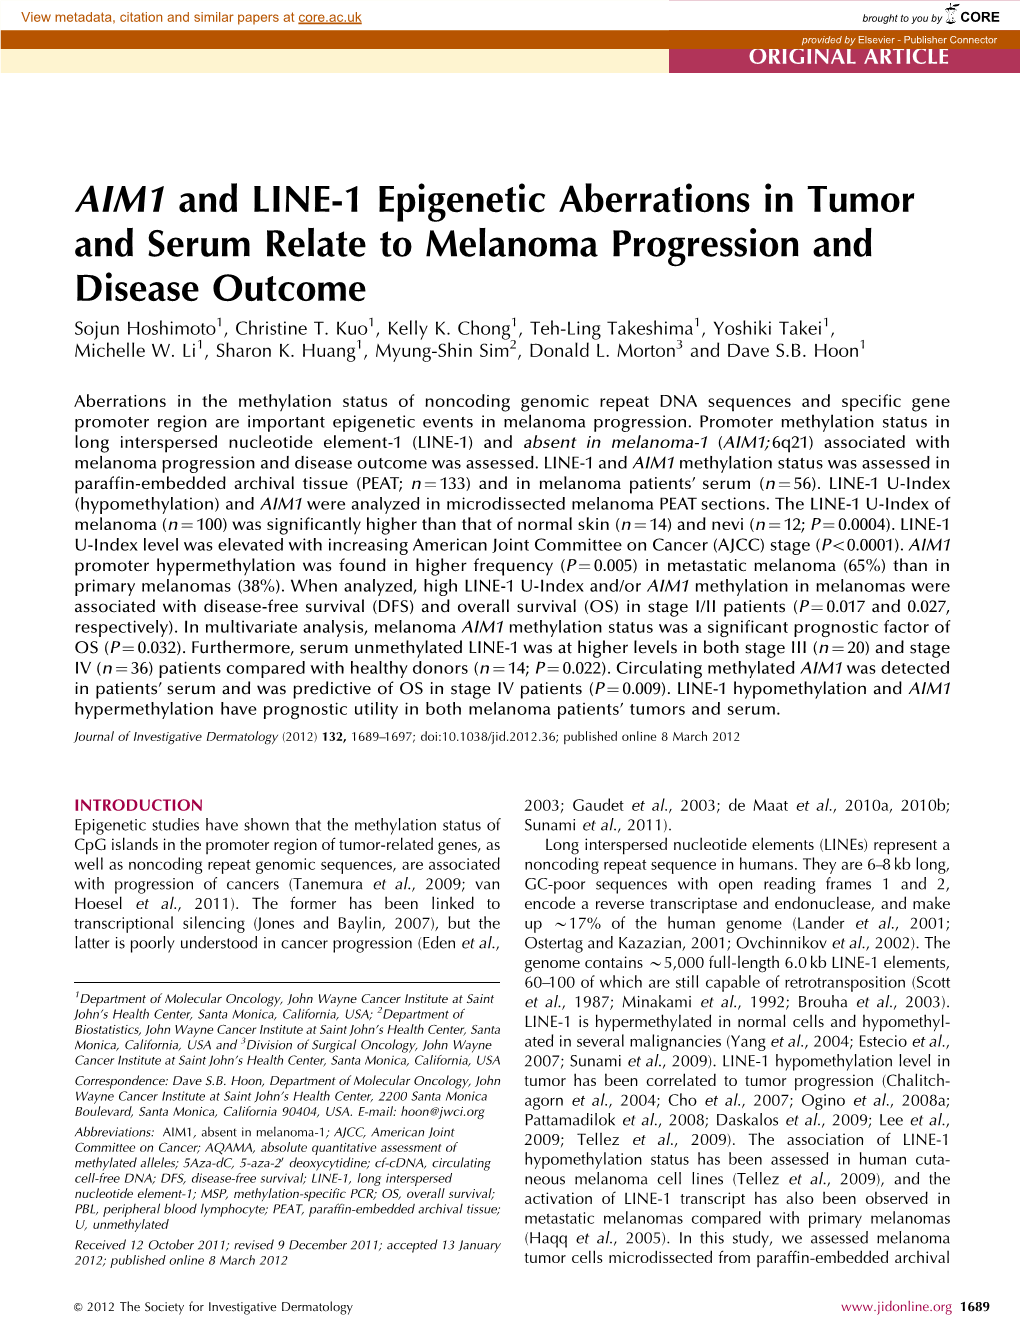 AIM1 and LINE-1 Epigenetic Aberrations in Tumor and Serum Relate to Melanoma Progression and Disease Outcome Sojun Hoshimoto1, Christine T